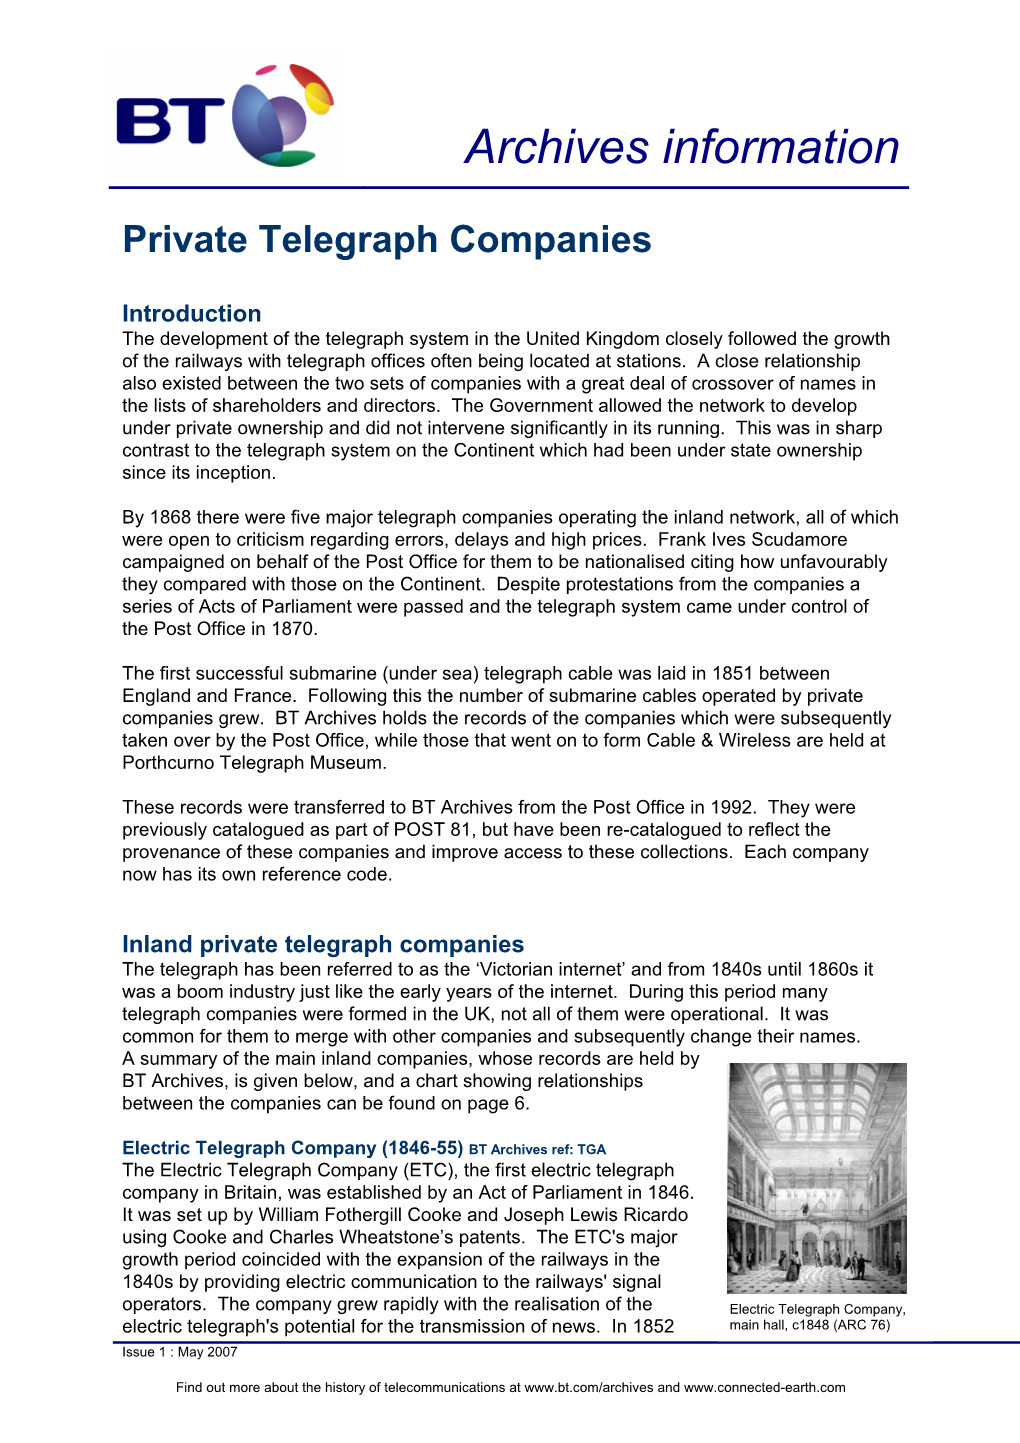 BT Archives Private Telegraph Companies